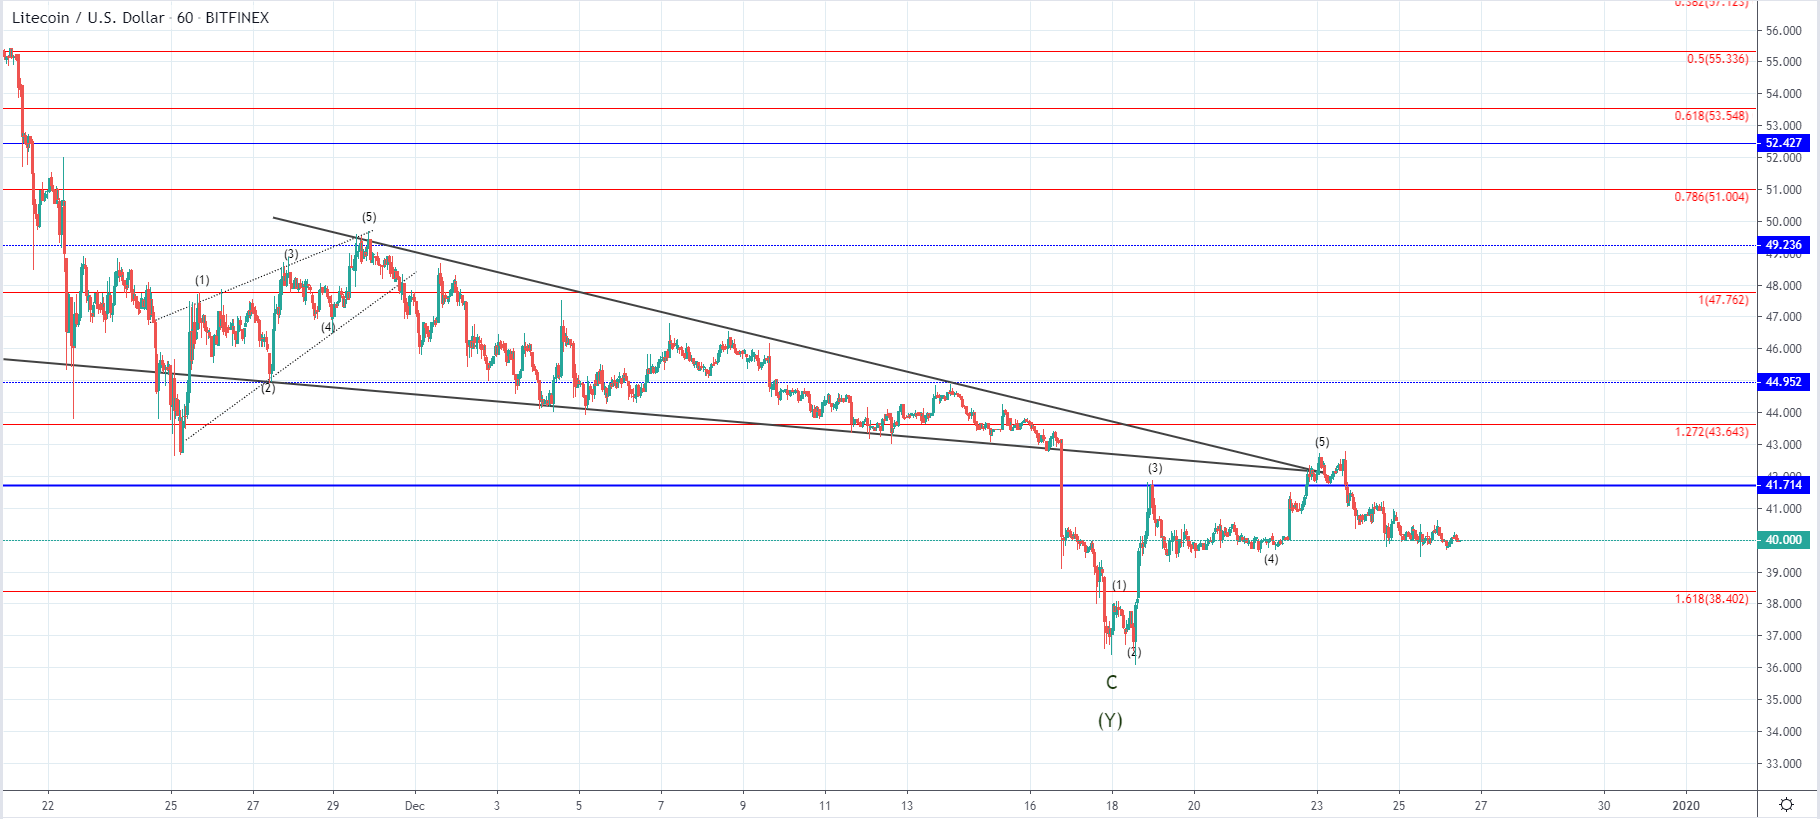 LTC and EOS - Starting impulse or a C wave?